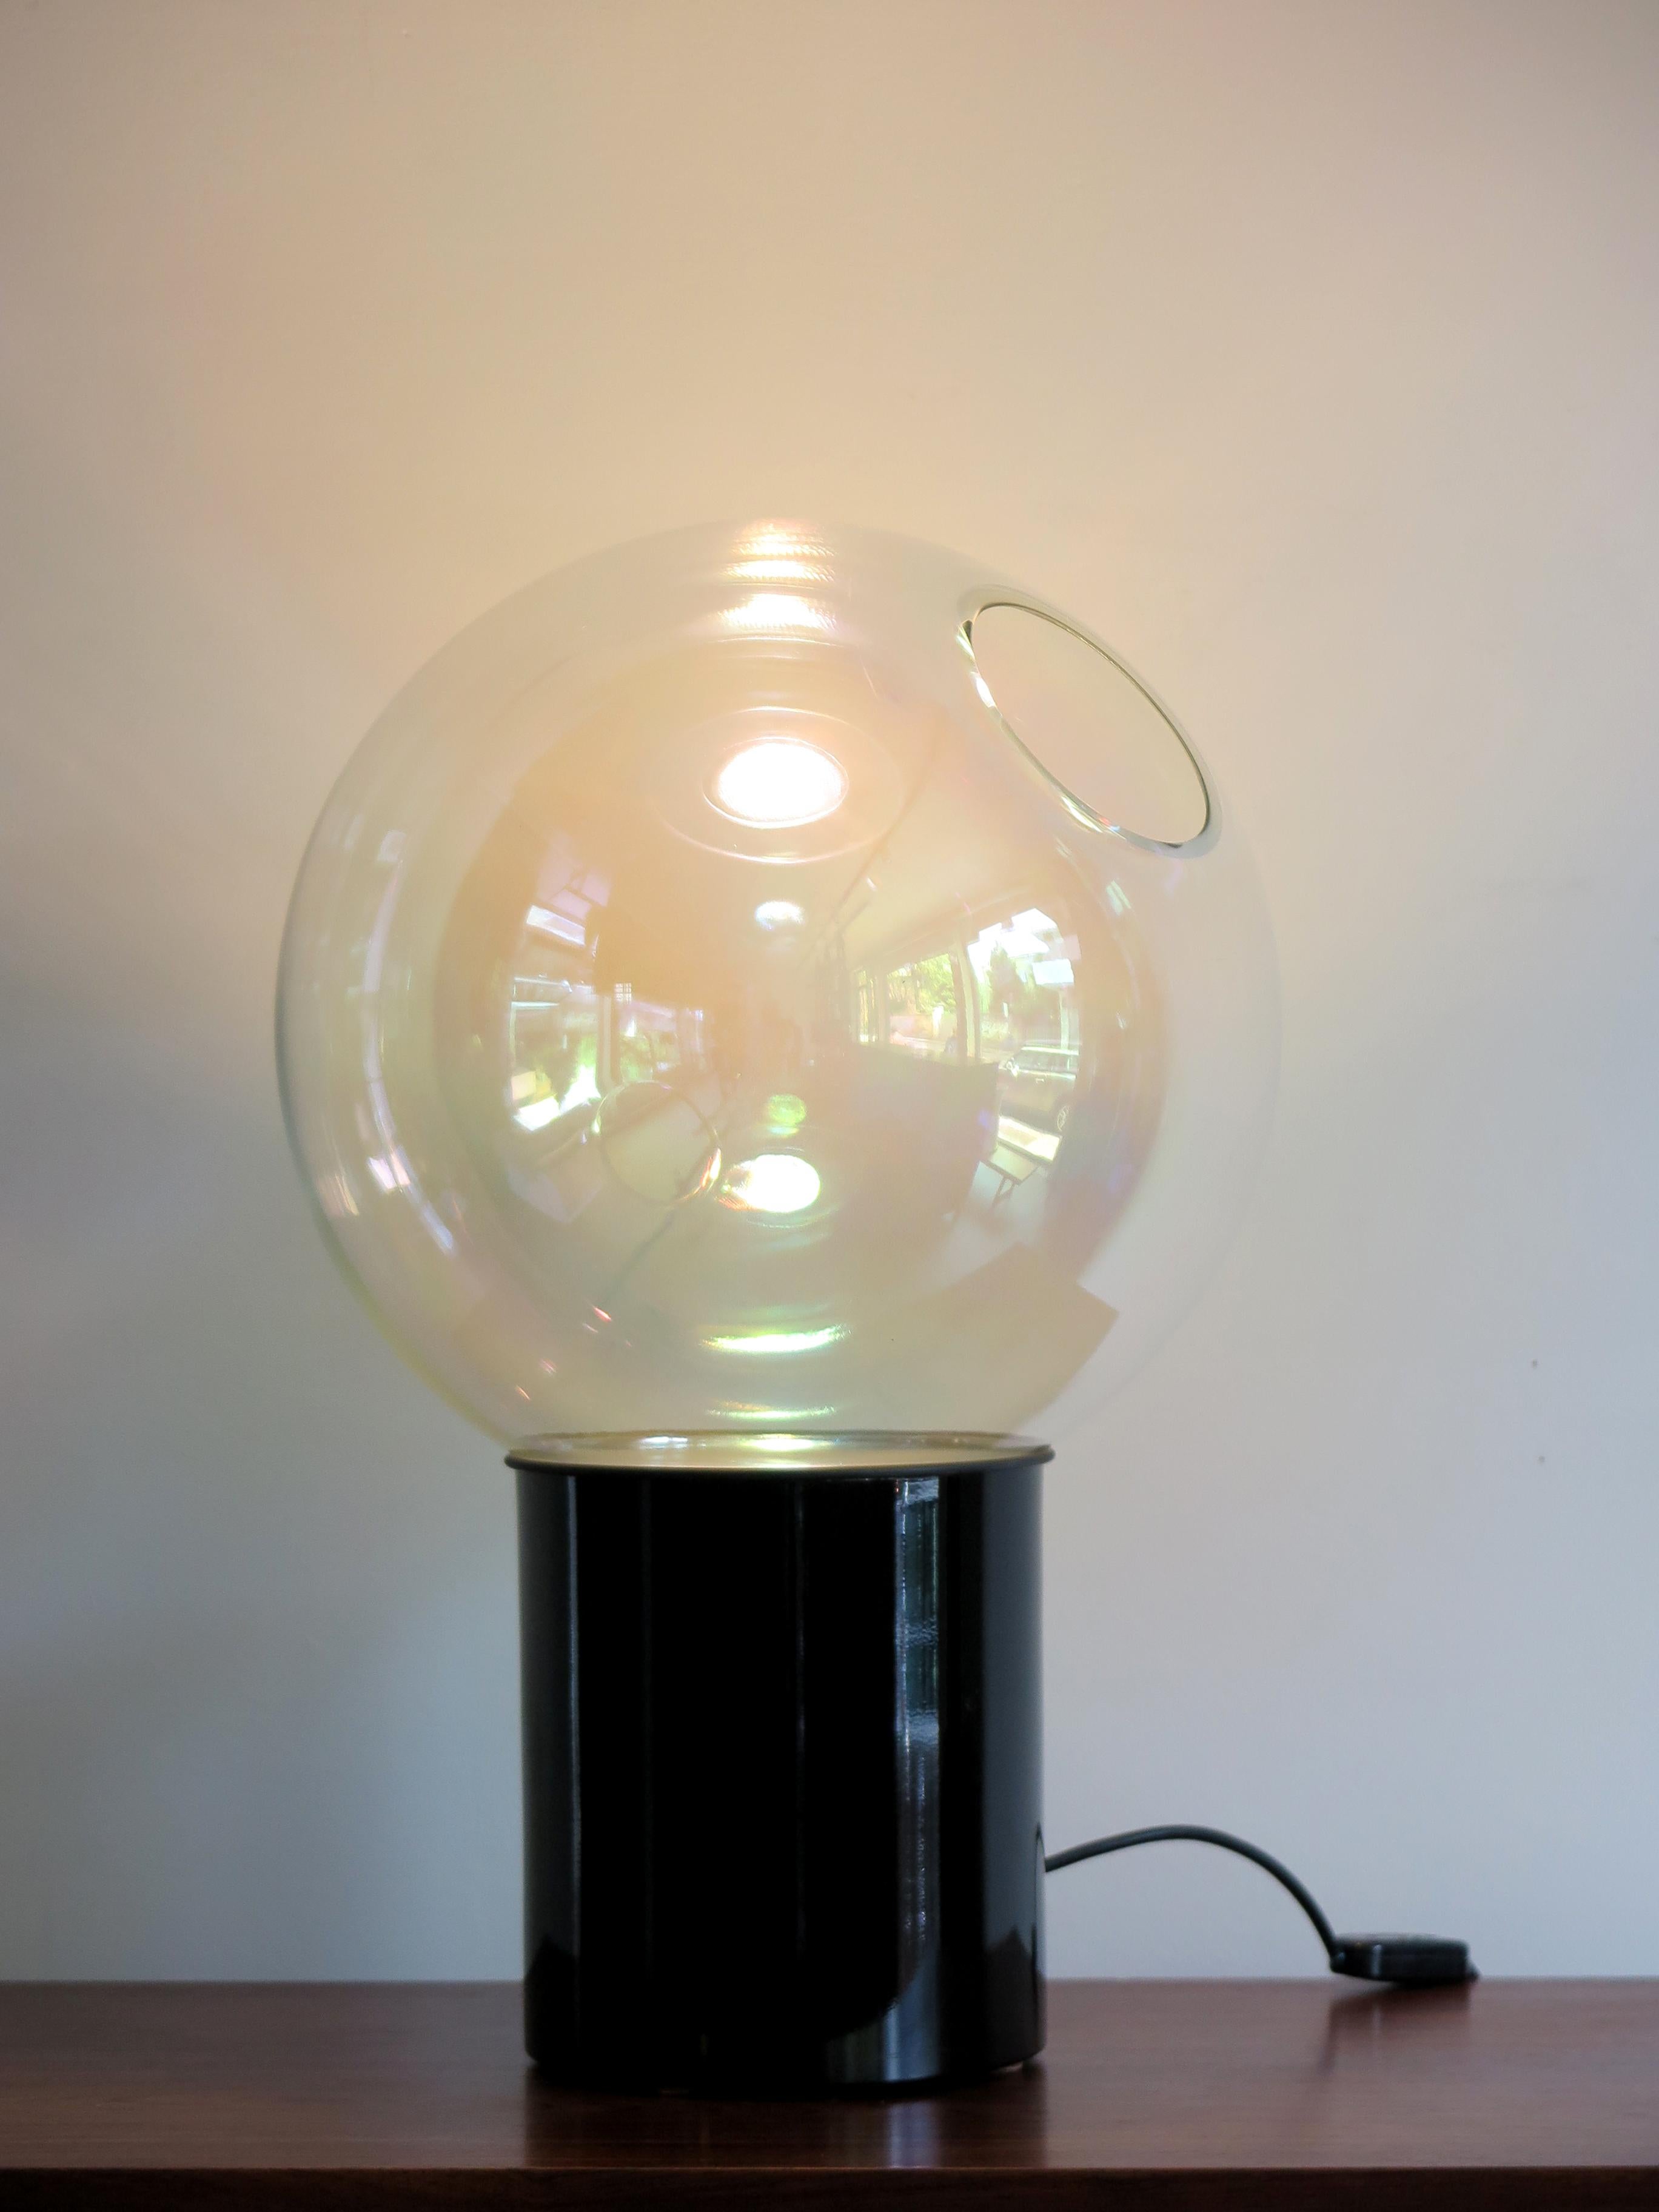 Italian table lamp designed by Carlo Nason and produced by Lumenform with irridescent Murano glass sphere and black metal base, Italy 1970s.
Please note that the lamp is original of the period and this shows normal signs of age and use.